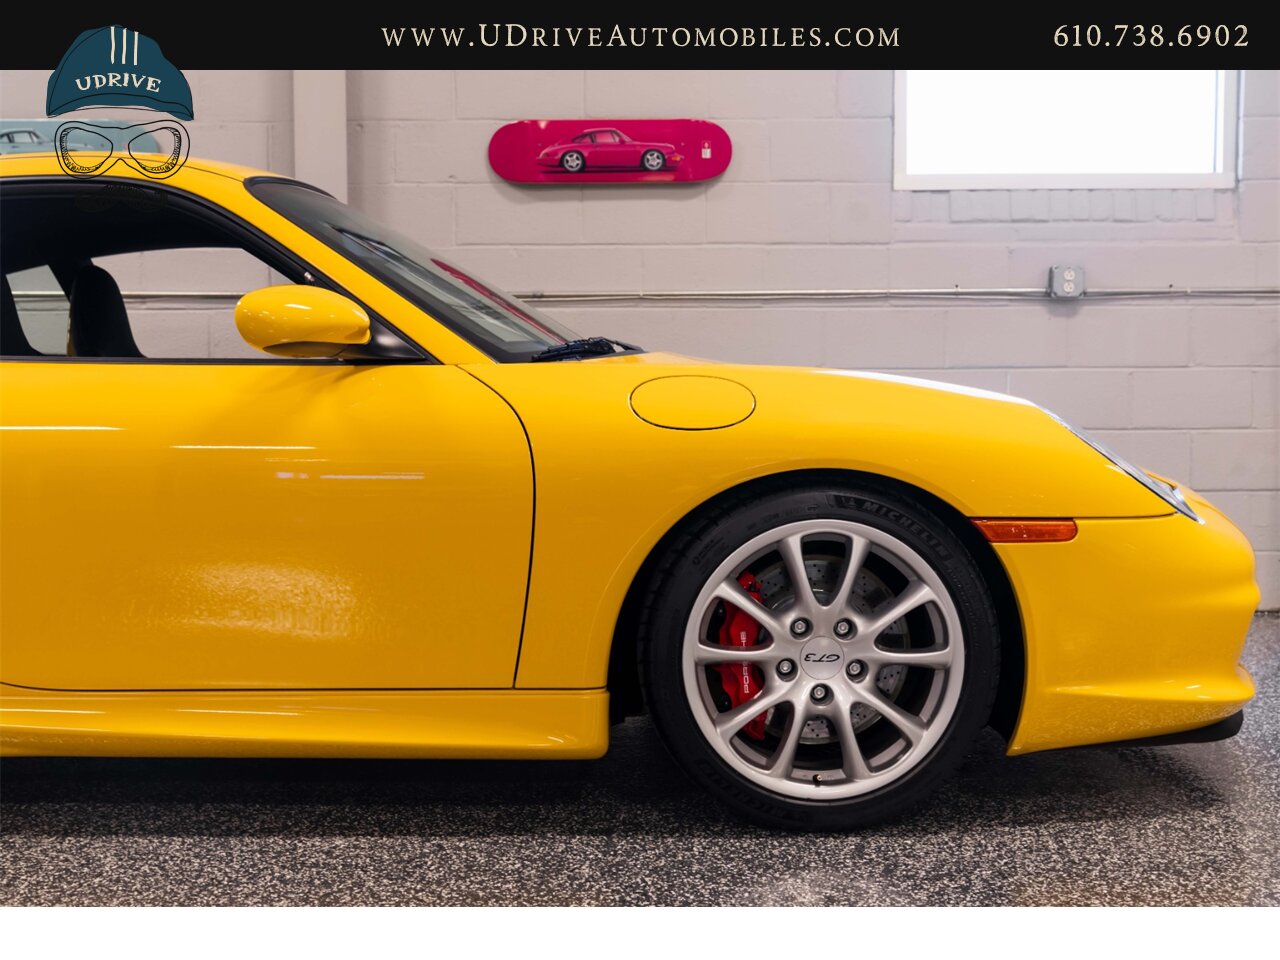 2005 Porsche 911 GT3 996 Speed Yellow Sport Seats Pntd Hardbacks  Pntd Console Deviating Stitch Yellow Accents Throughout - Photo 17 - West Chester, PA 19382